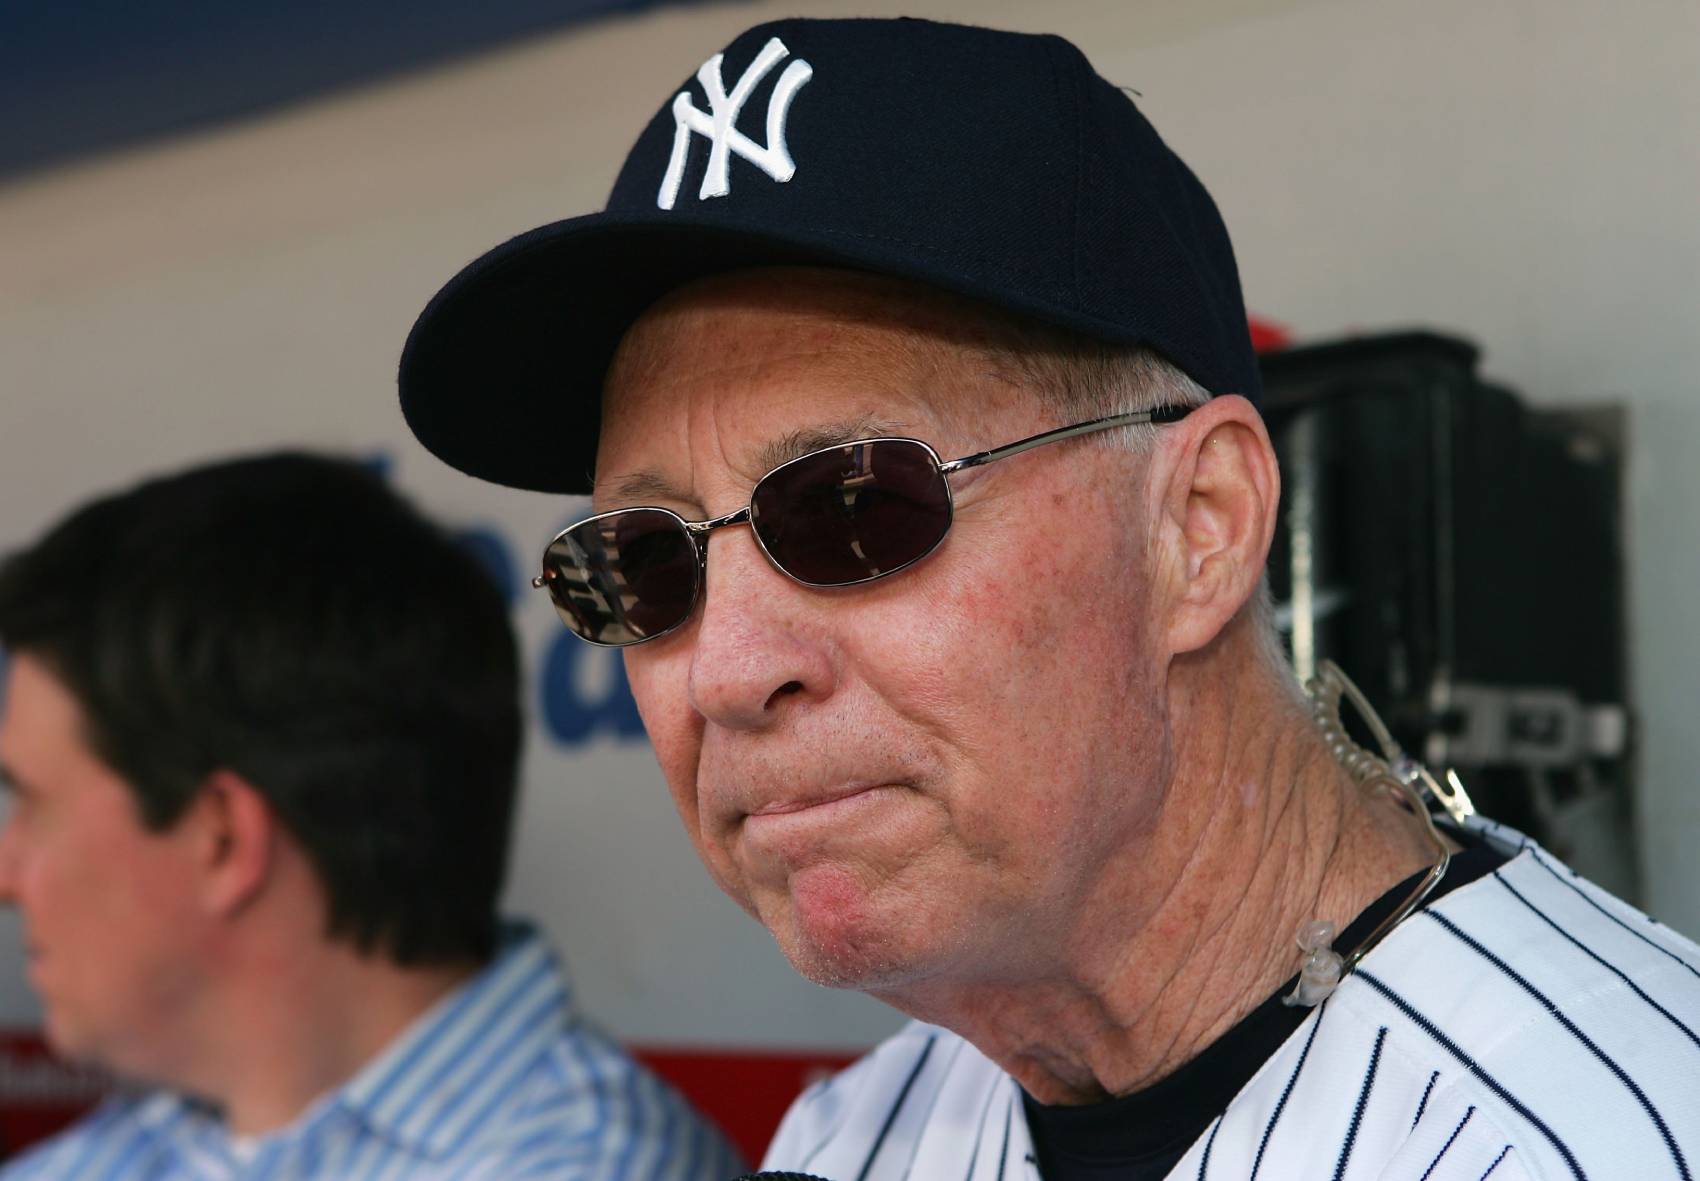 Longtime New York Yankees outfielder and broadcaster Bobby Murcer passed away from cancer in 2008.